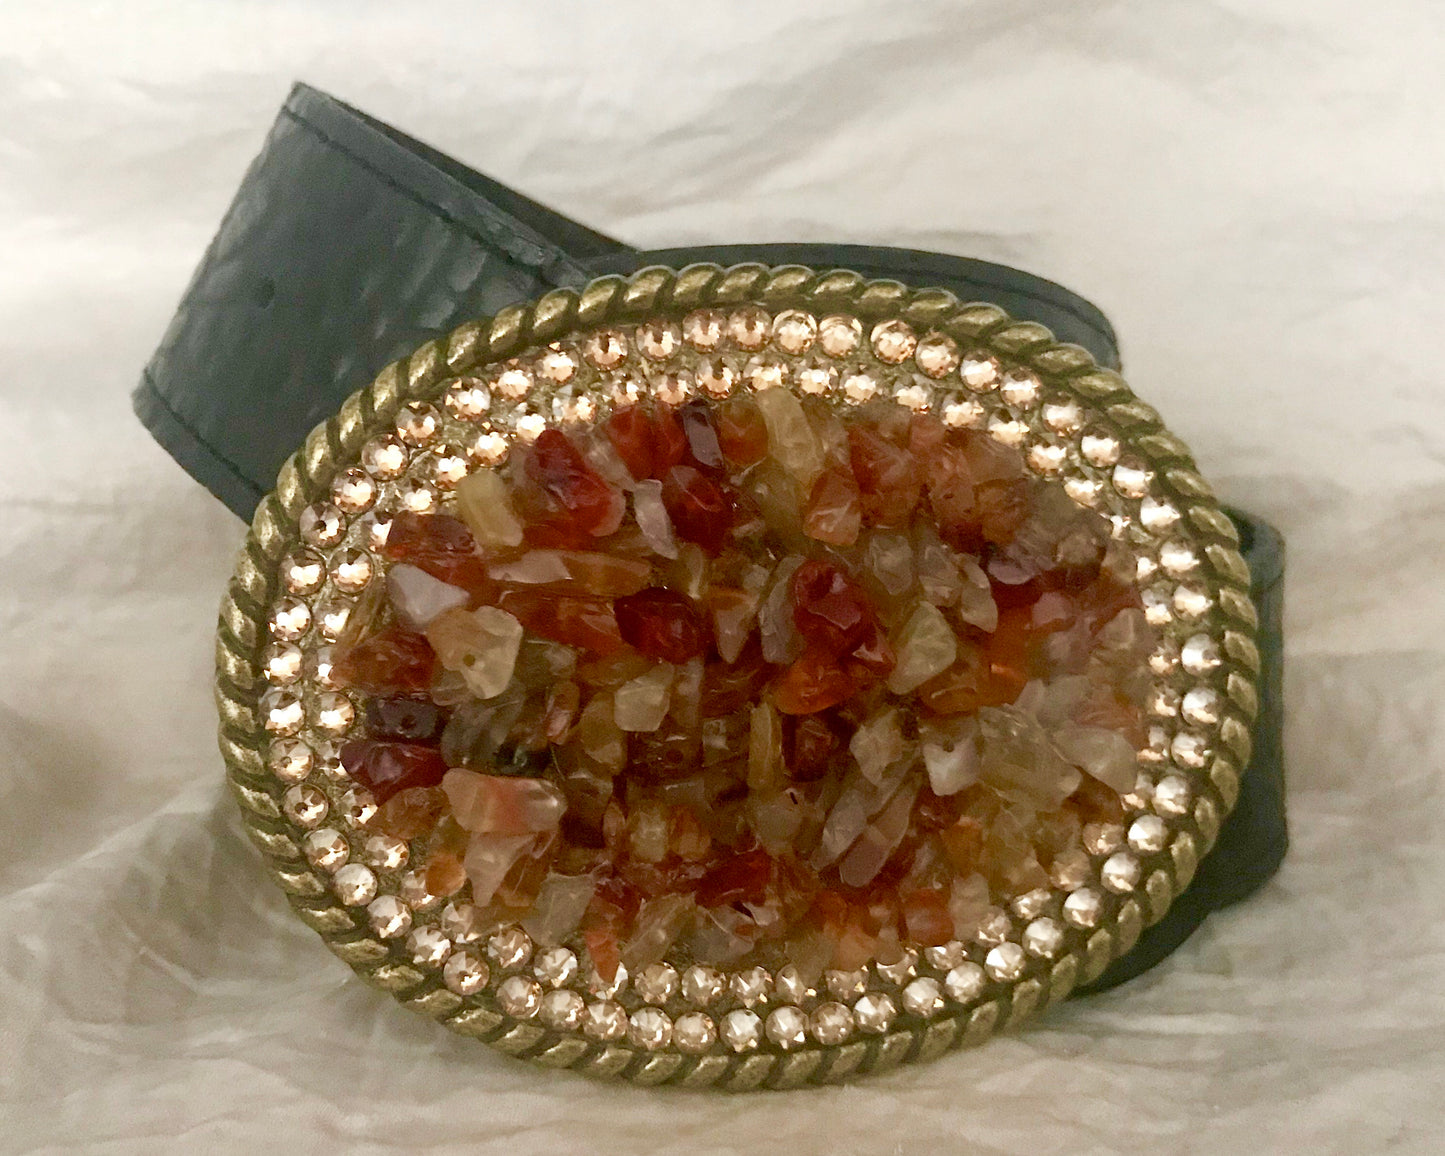 The Stoned Carnelian with Crystal Golden Shadow